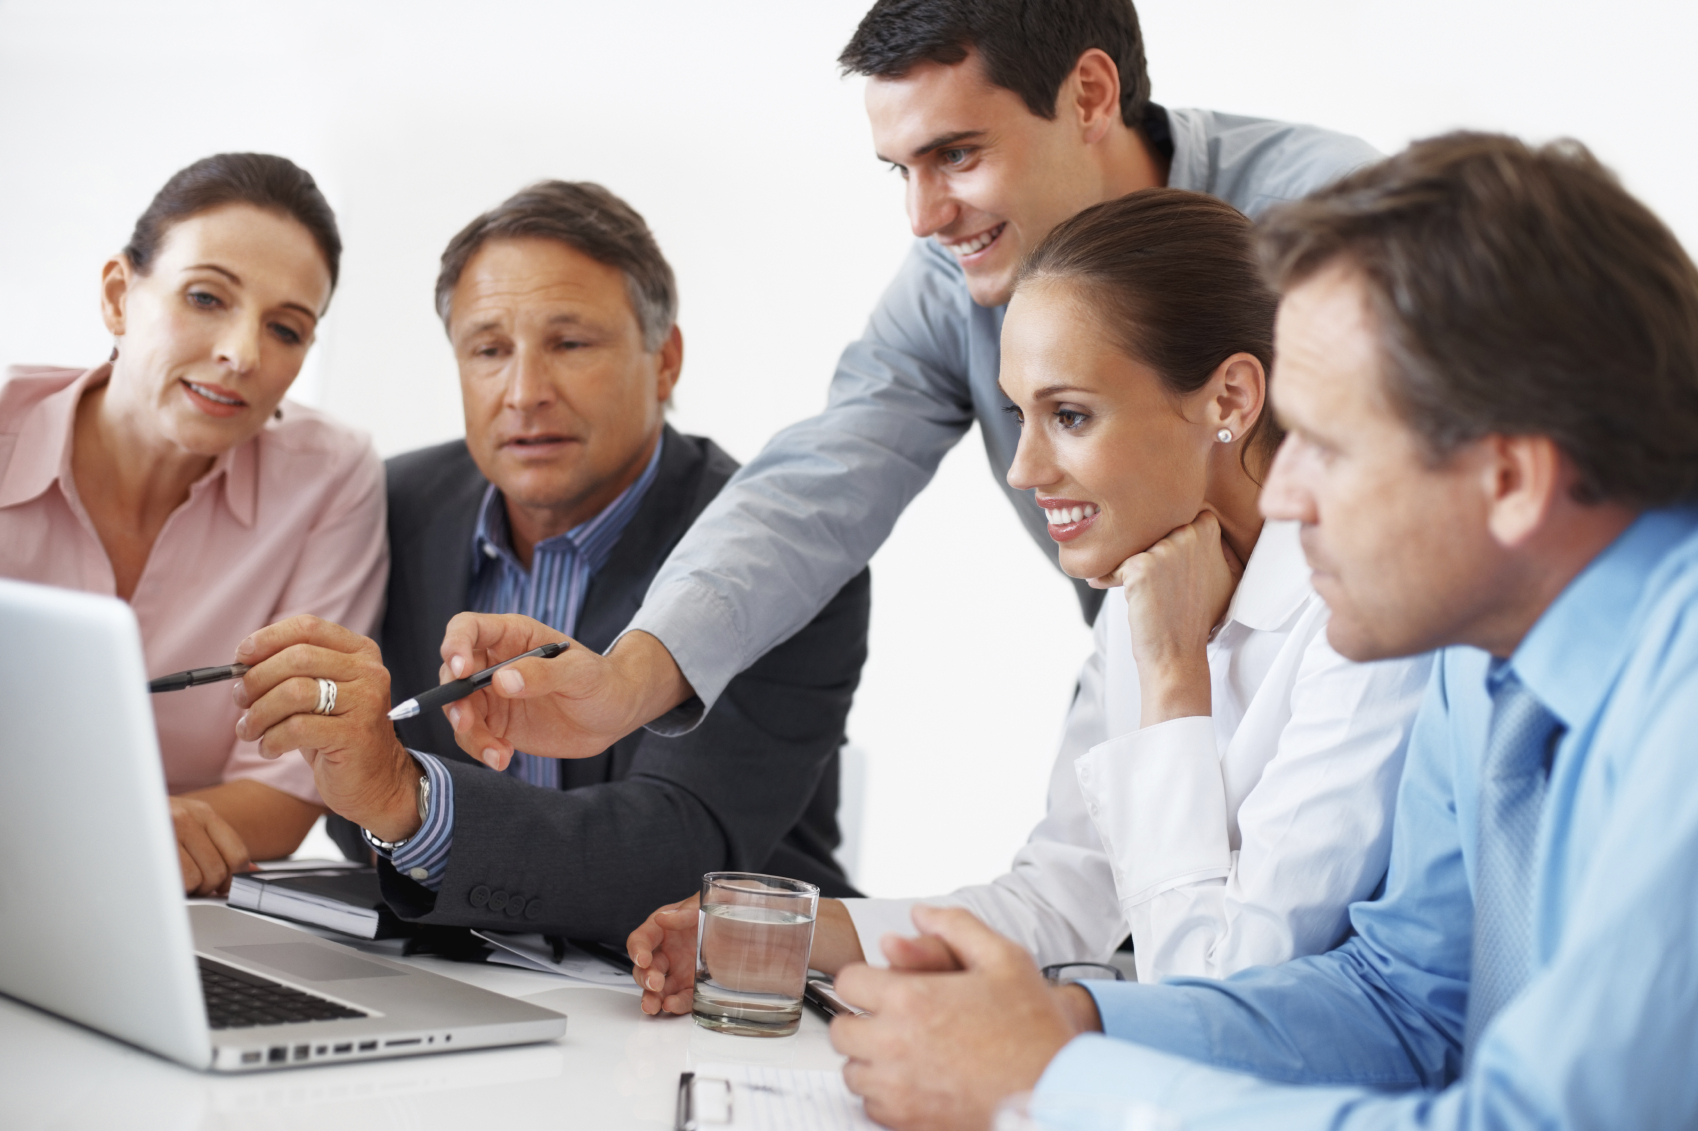 business-people-working-together-istock_000017346252medium